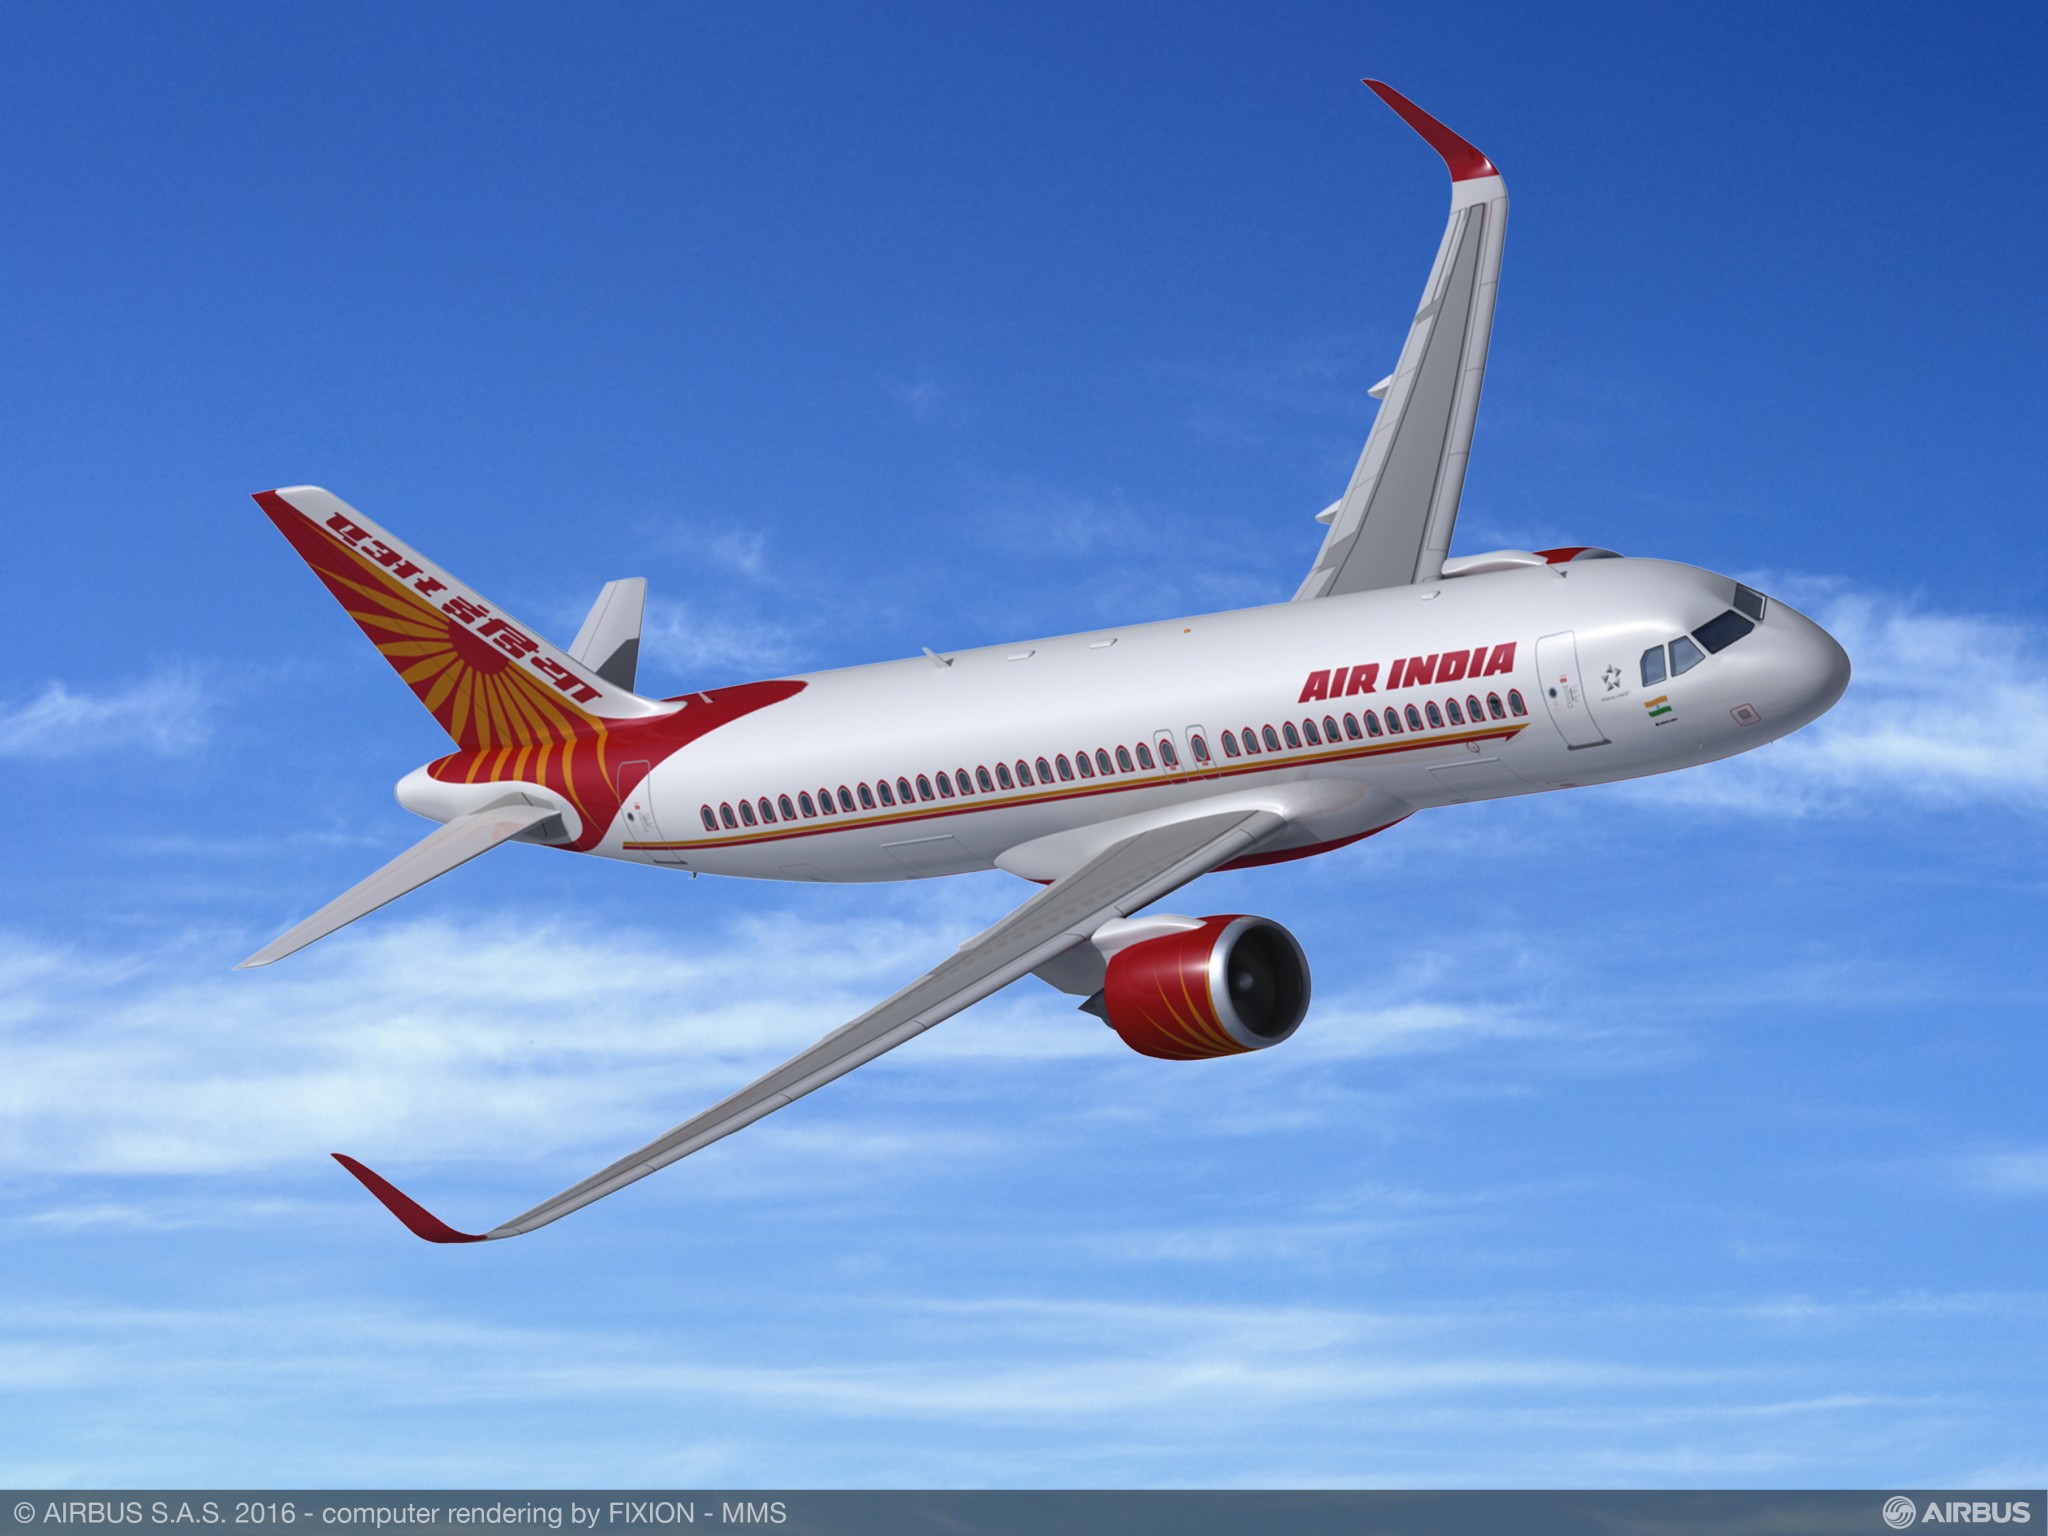 Air India to introduce 20 additional flights to Qatar in wake of FIFA fever